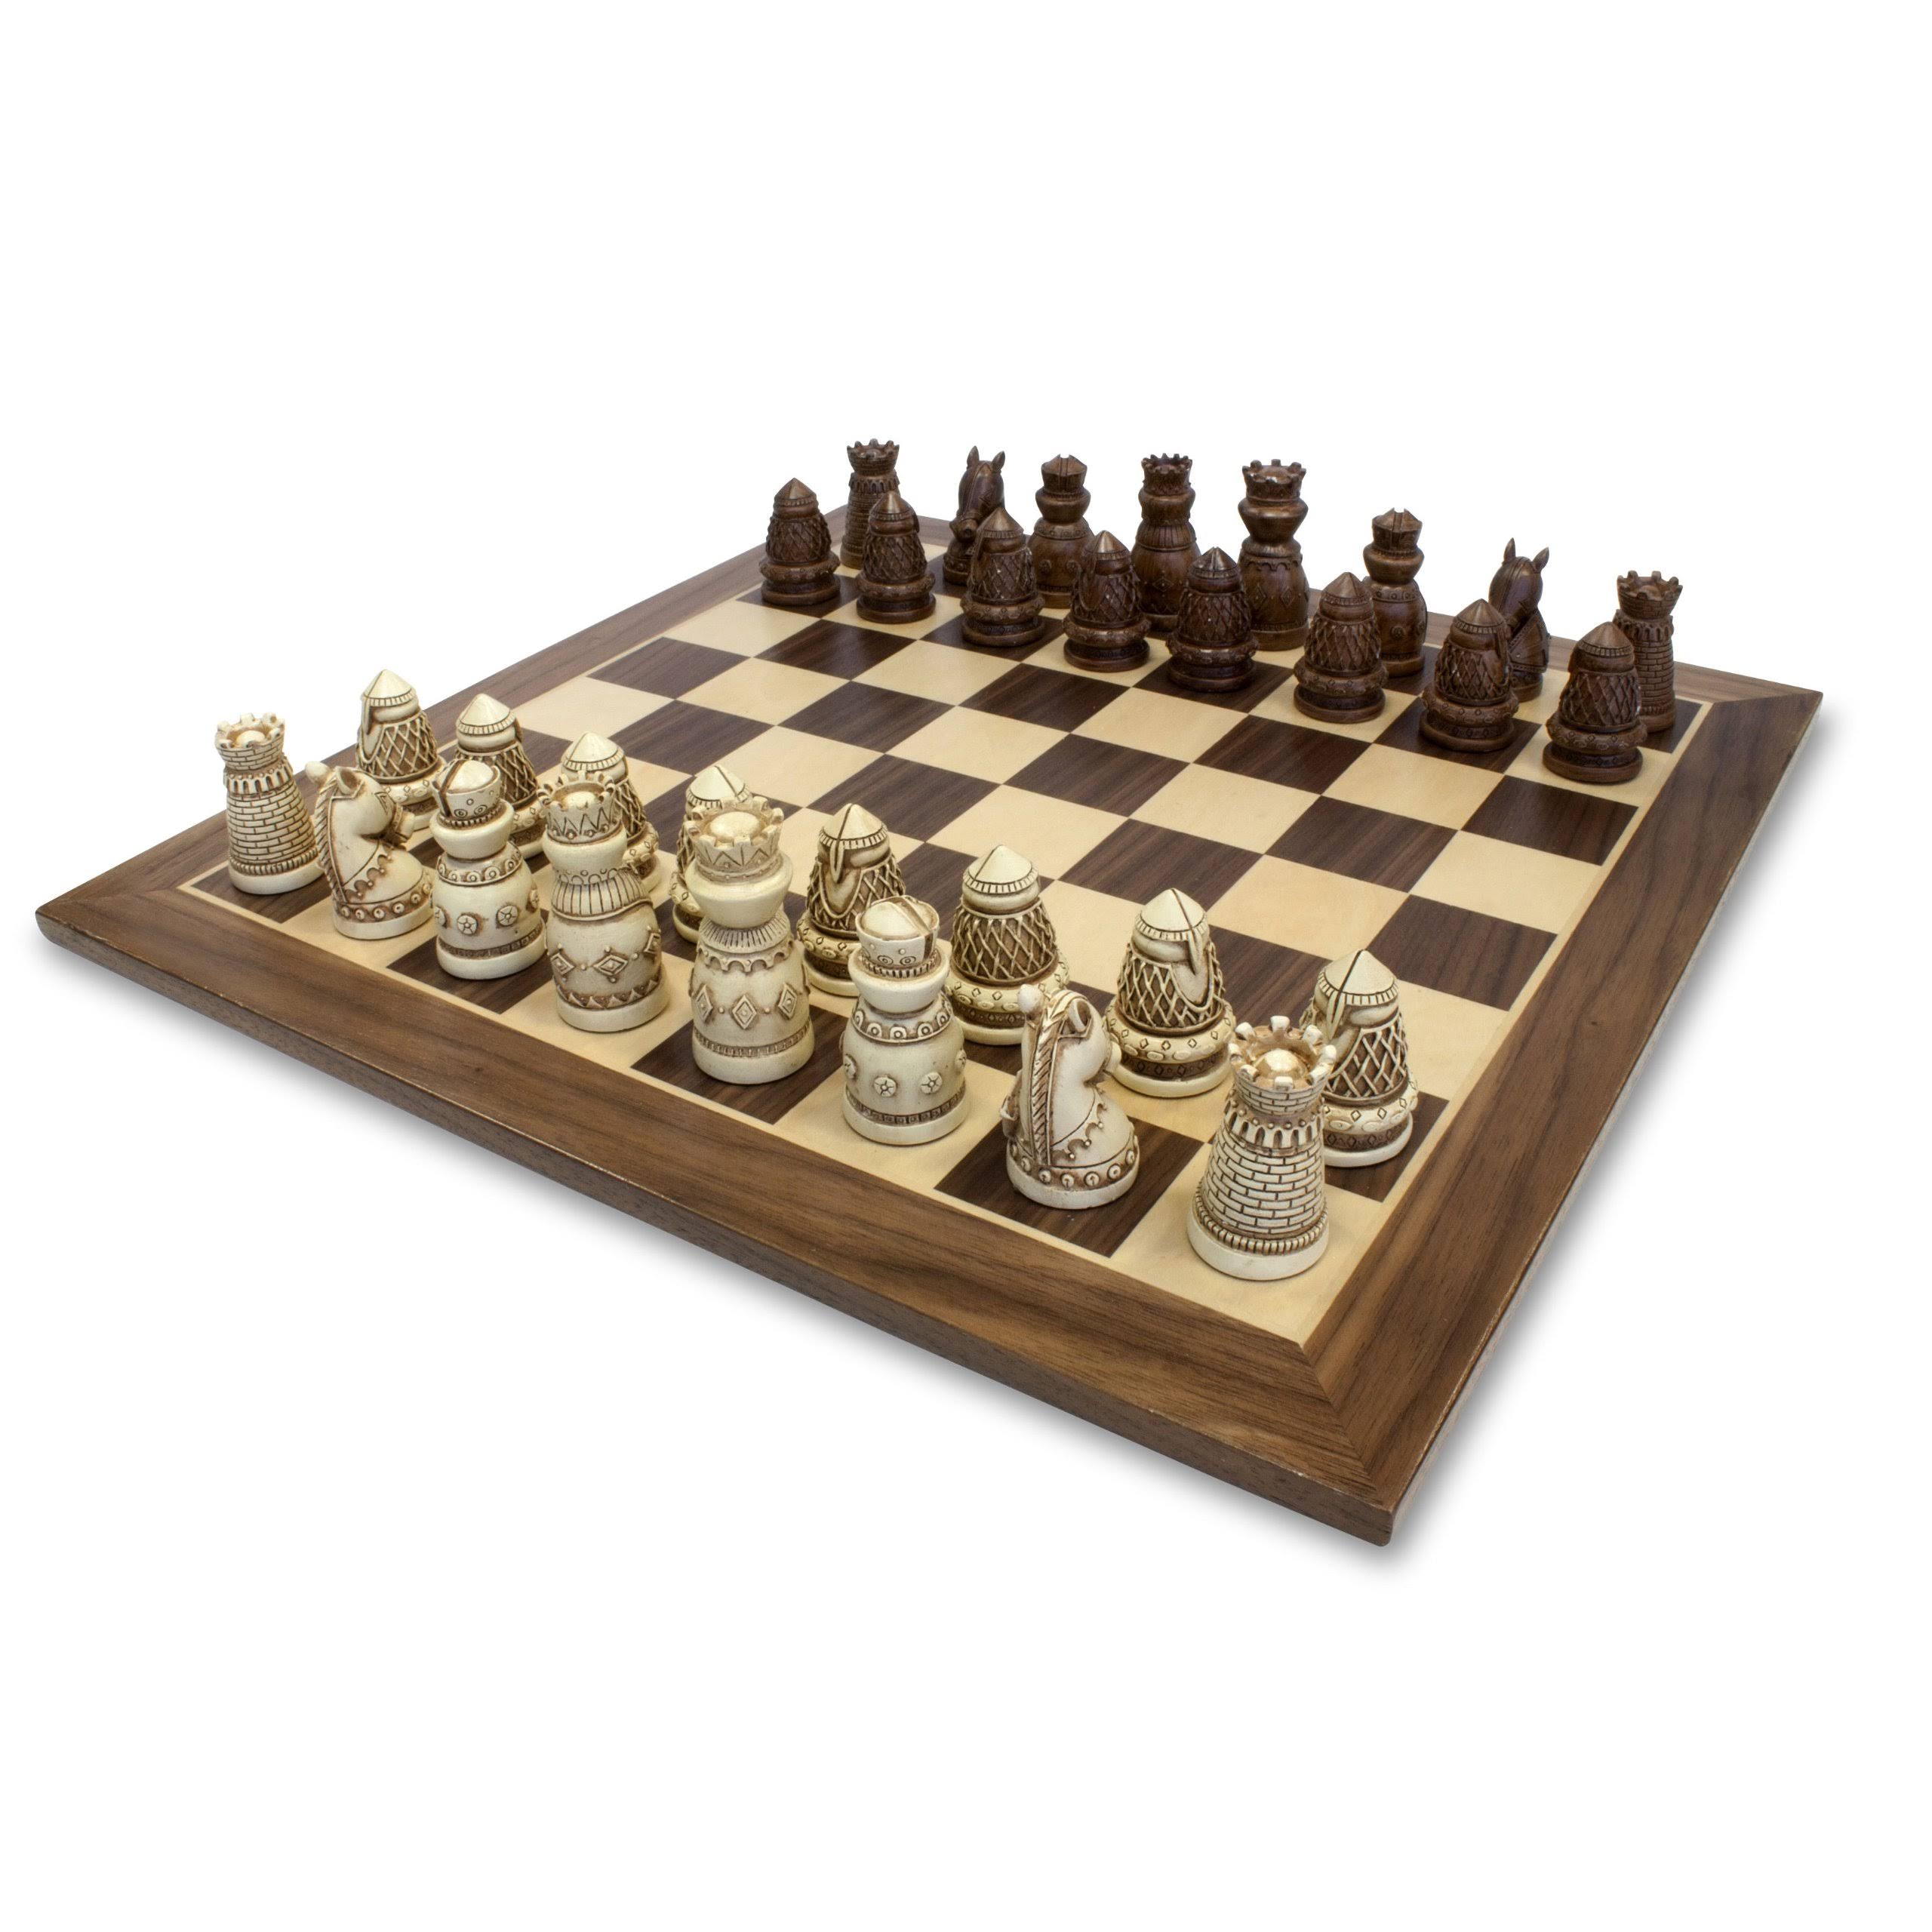 Wood Expressions Mediaeval Chess Set with Wooden Board